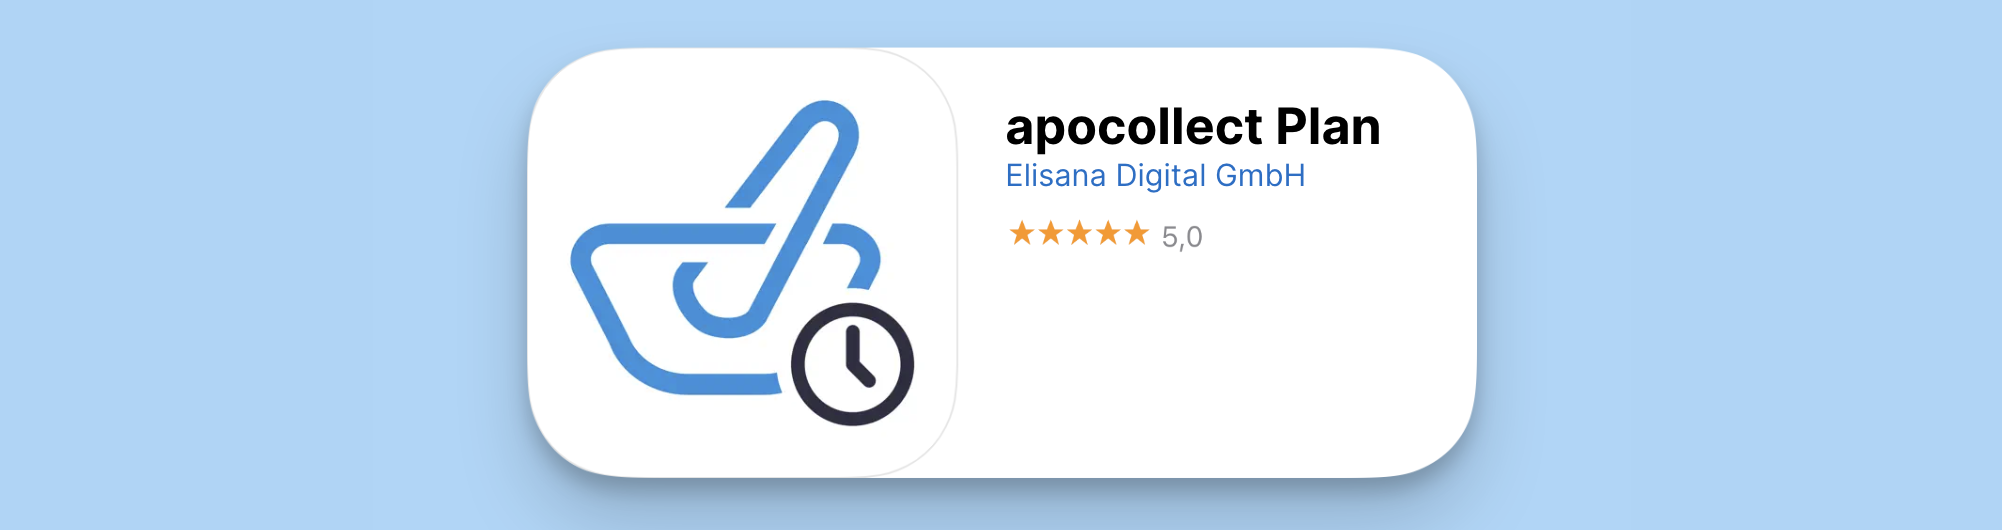 apocollect-plan-appstore